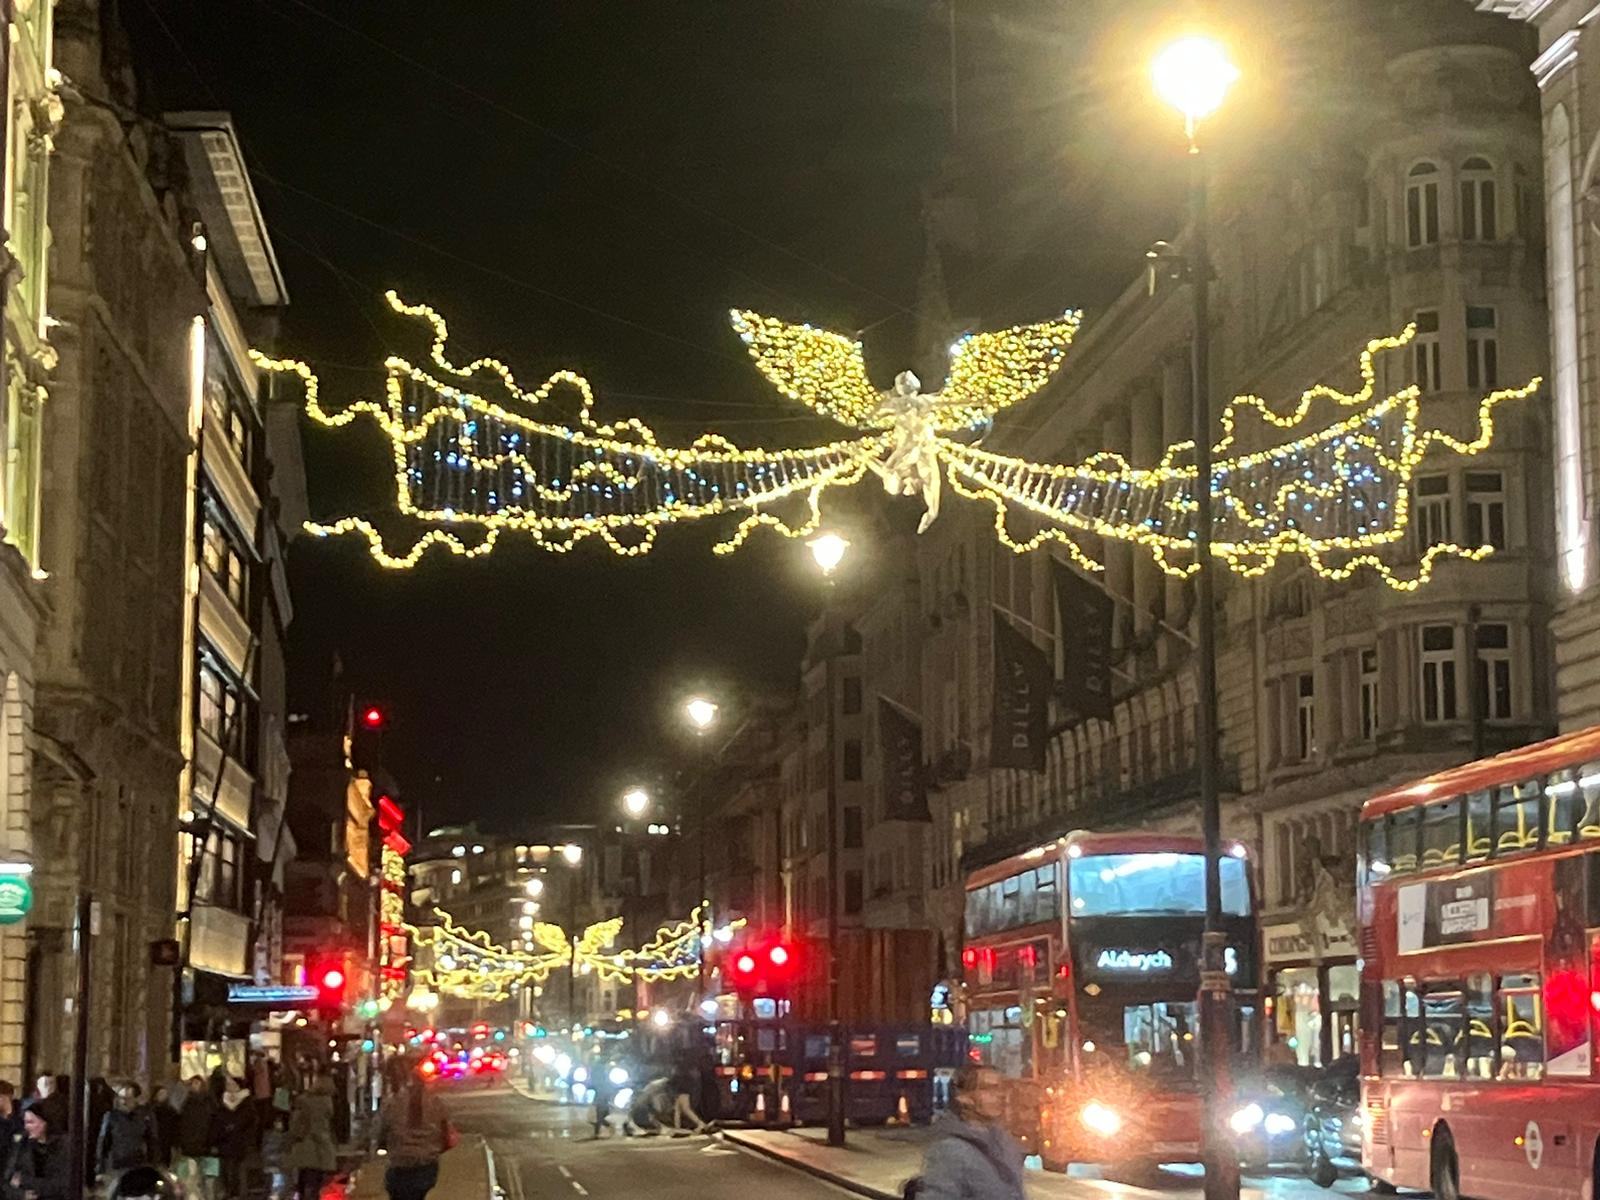 London's Christmas Lights for people who can't travel.